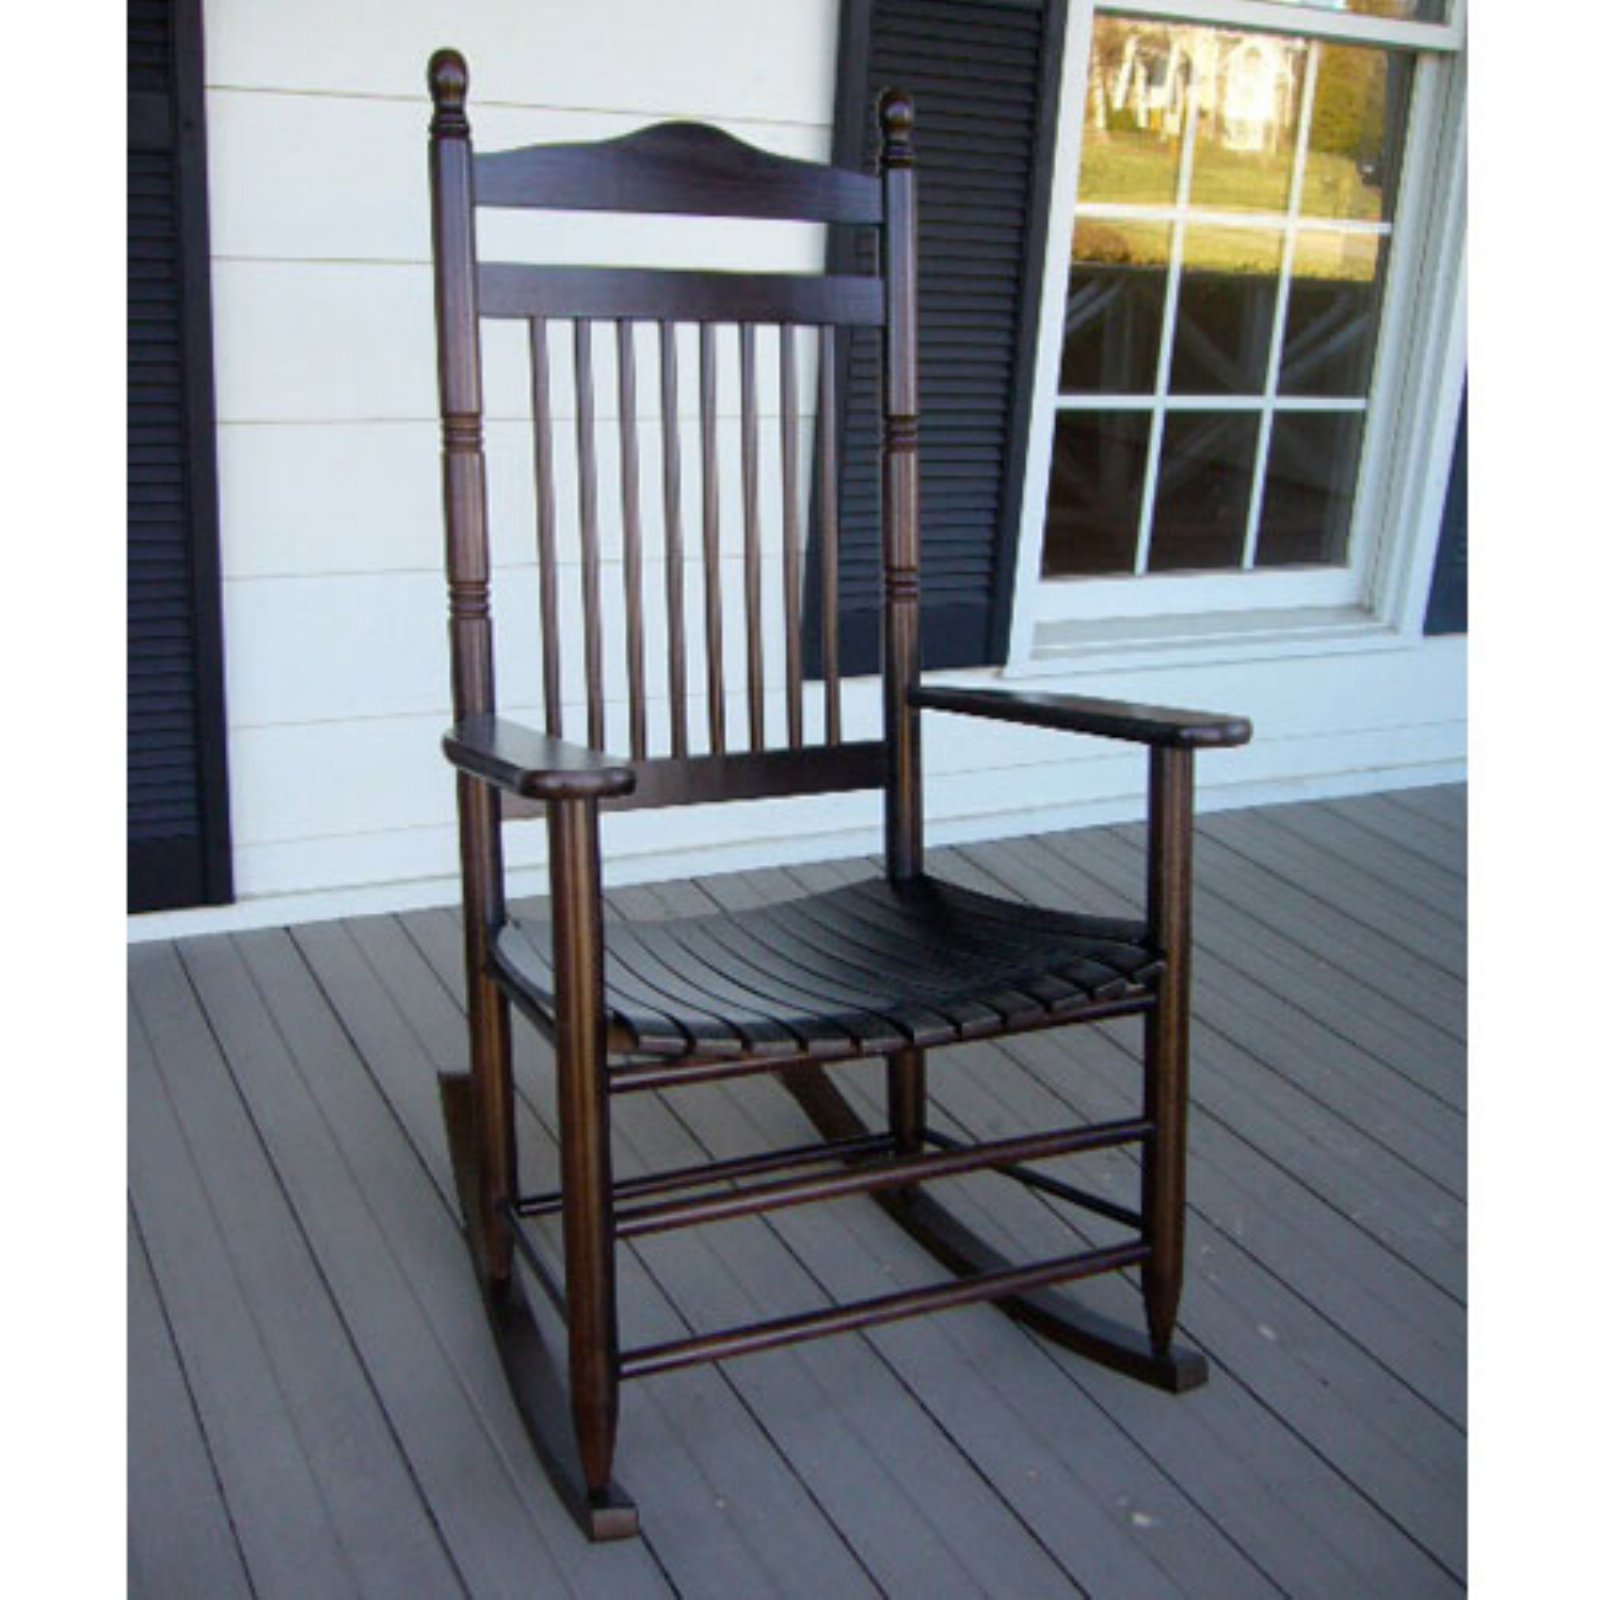 Dixie Seating Calabash Indoor/Outdoor Spindle Ready-To-Assemble Rocking Chair - image 4 of 8